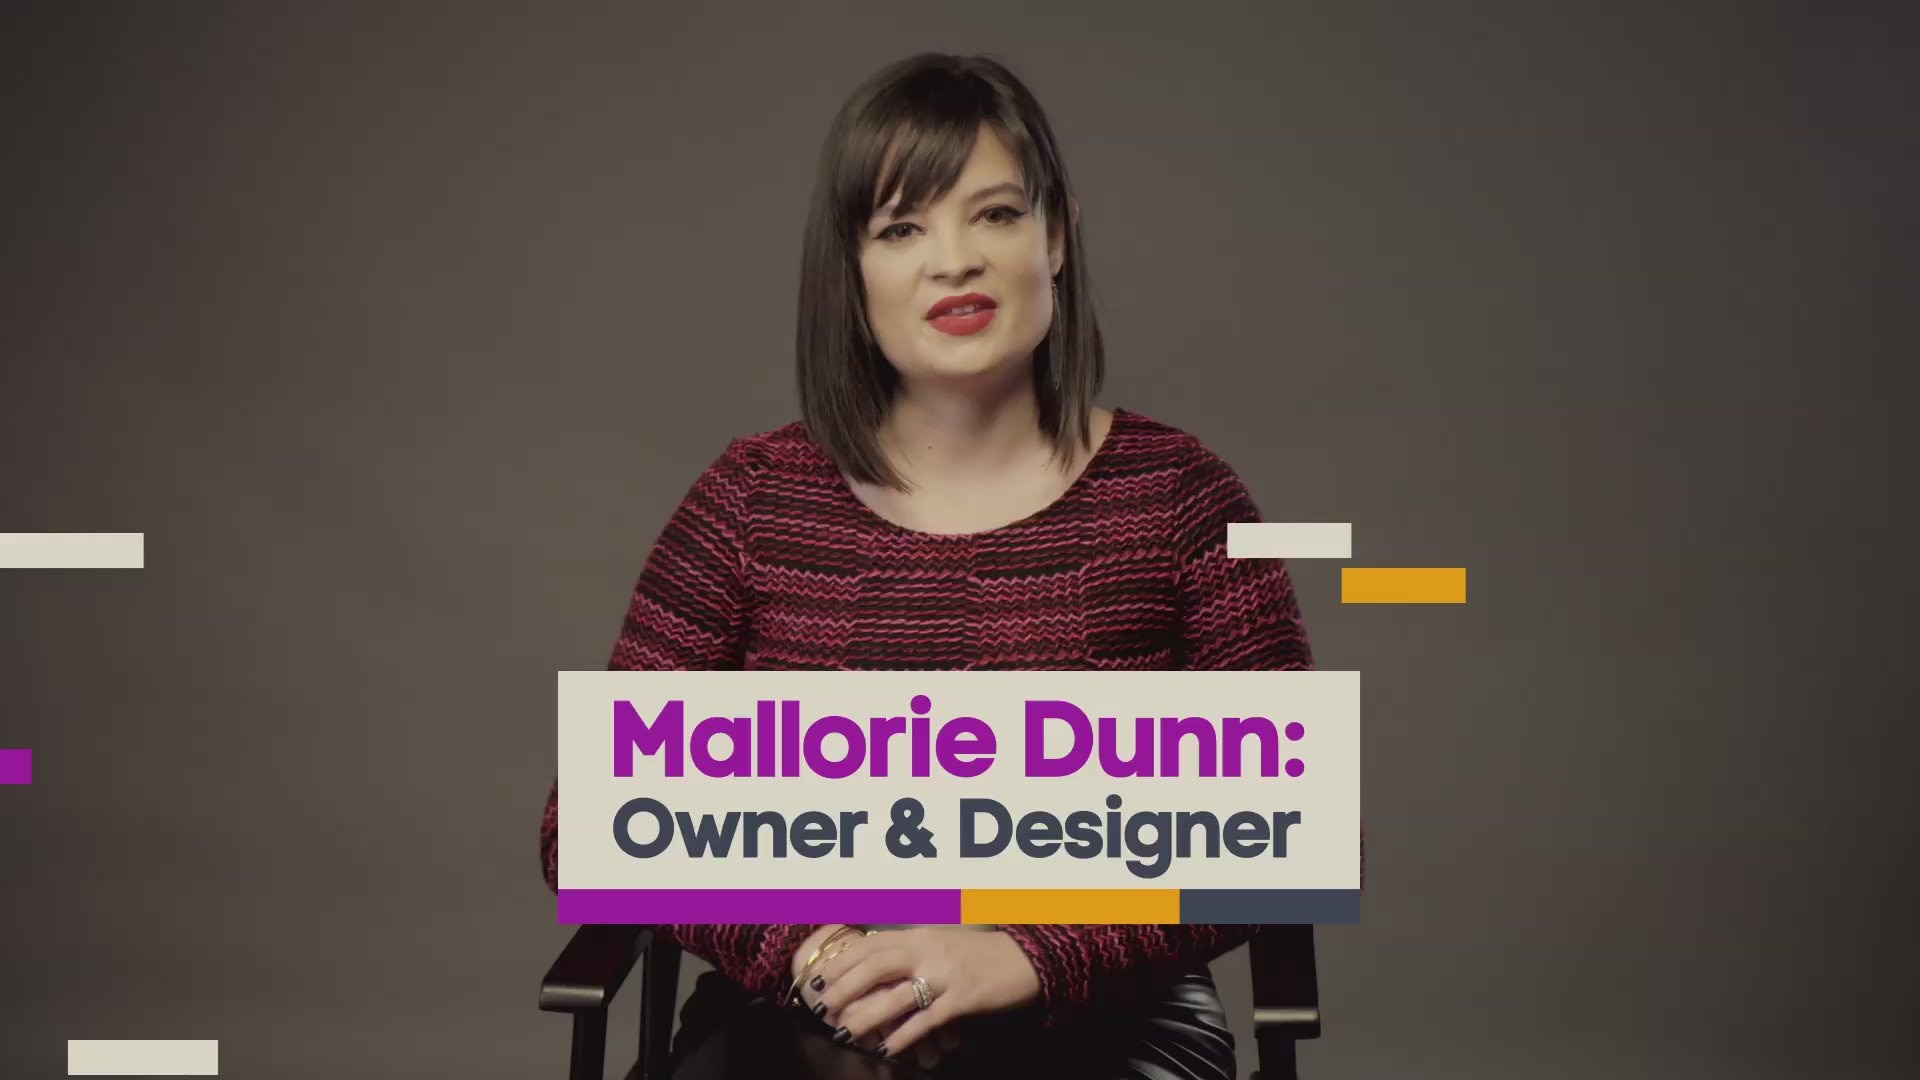 Mallorie Dunn is Transforming Body Positive Fashion